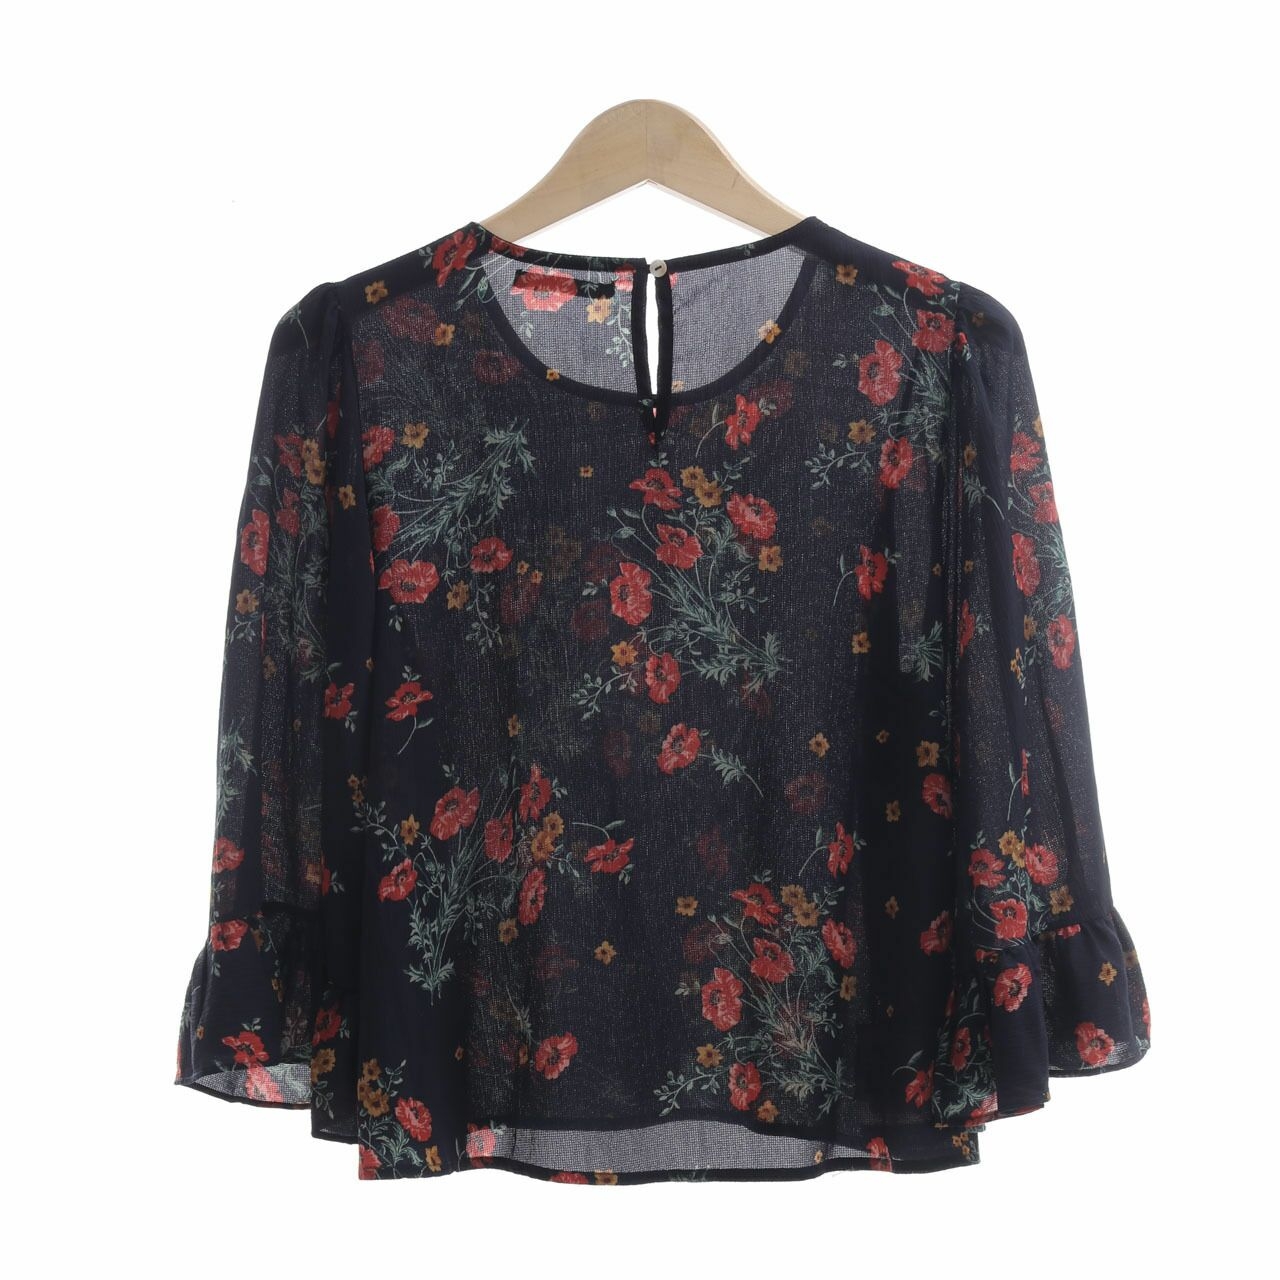 Uptown Girl Navy Floral Blouse